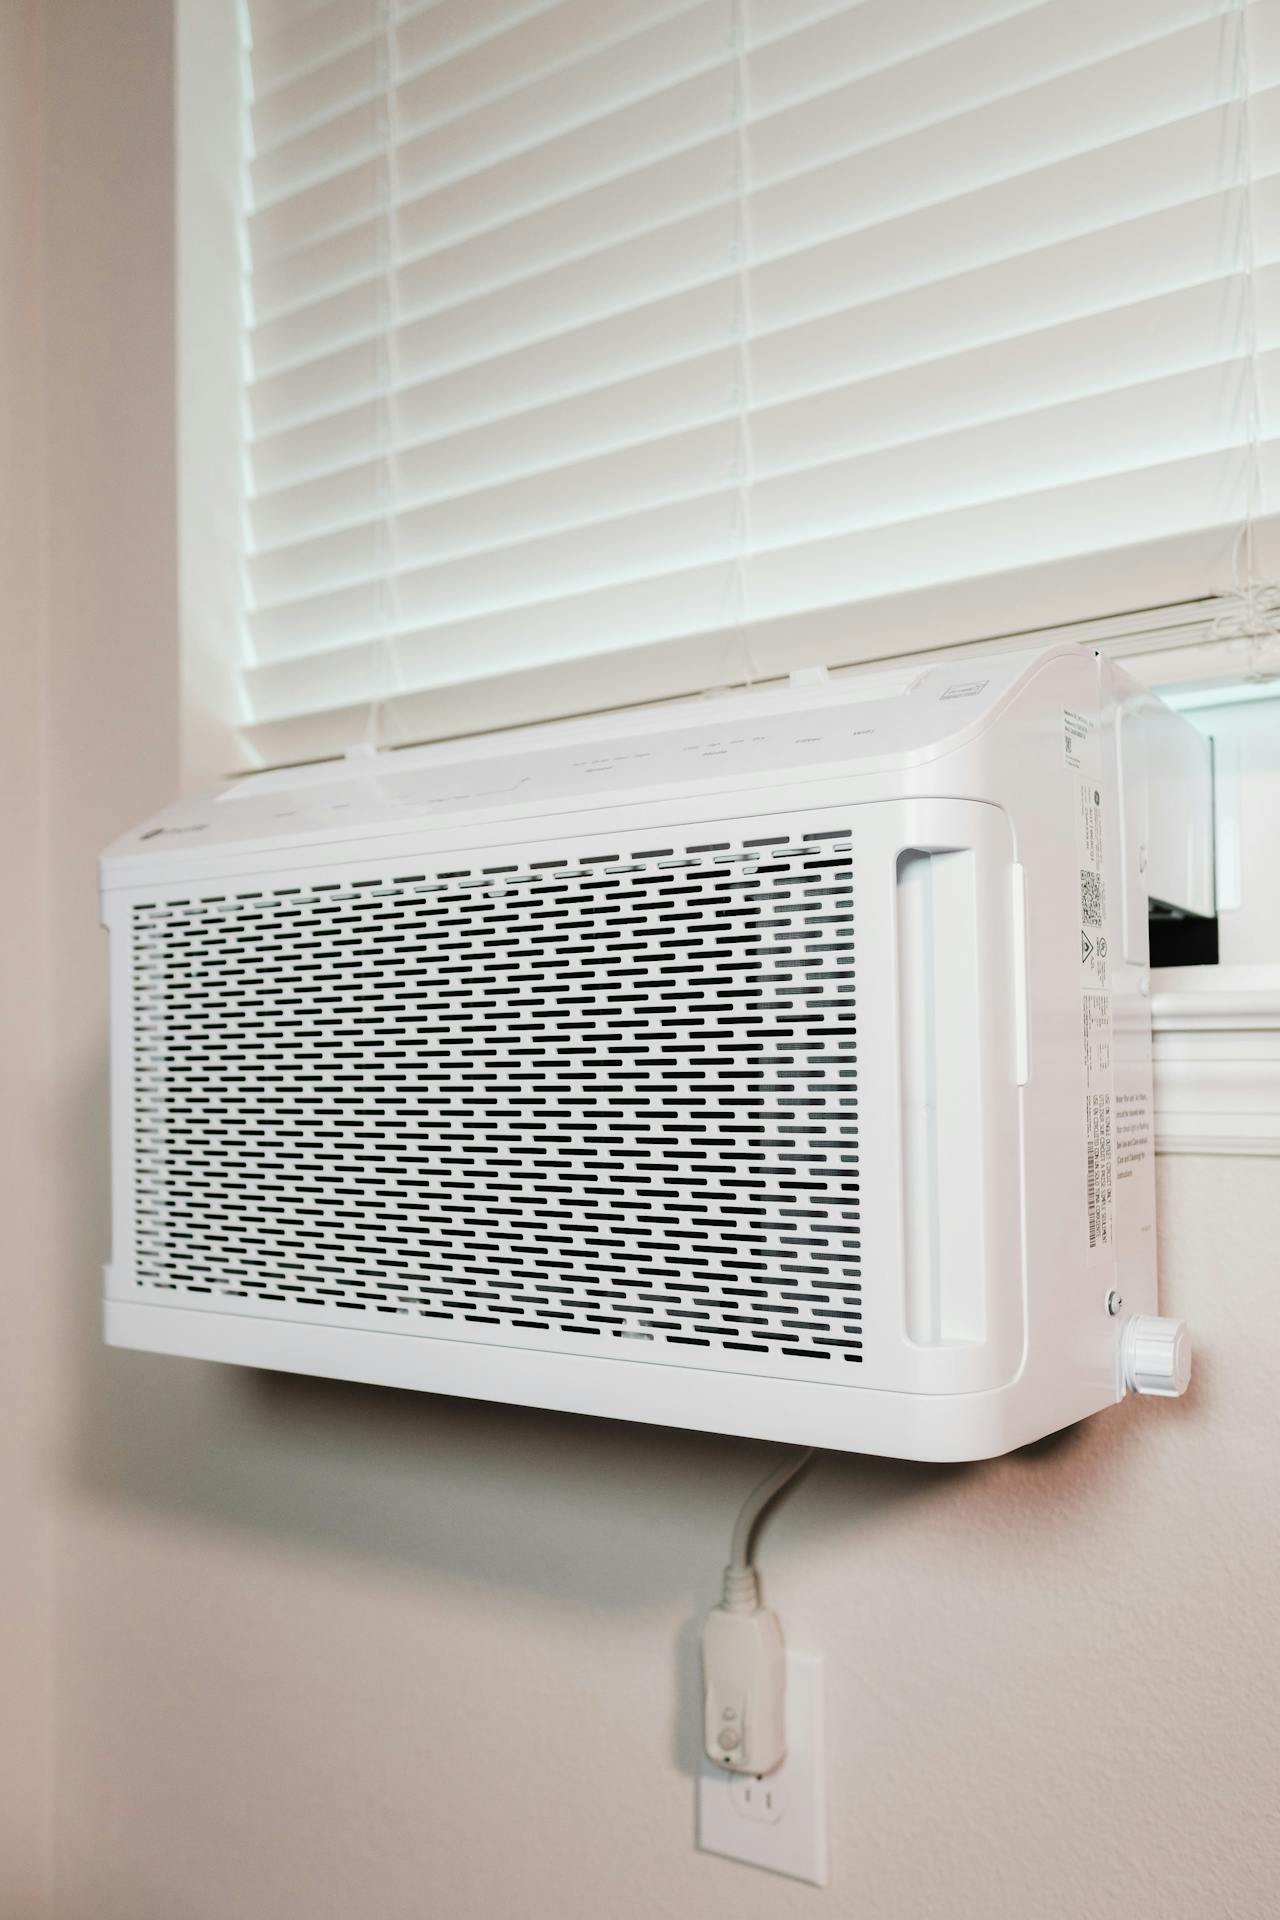 An invertor air-condition unit